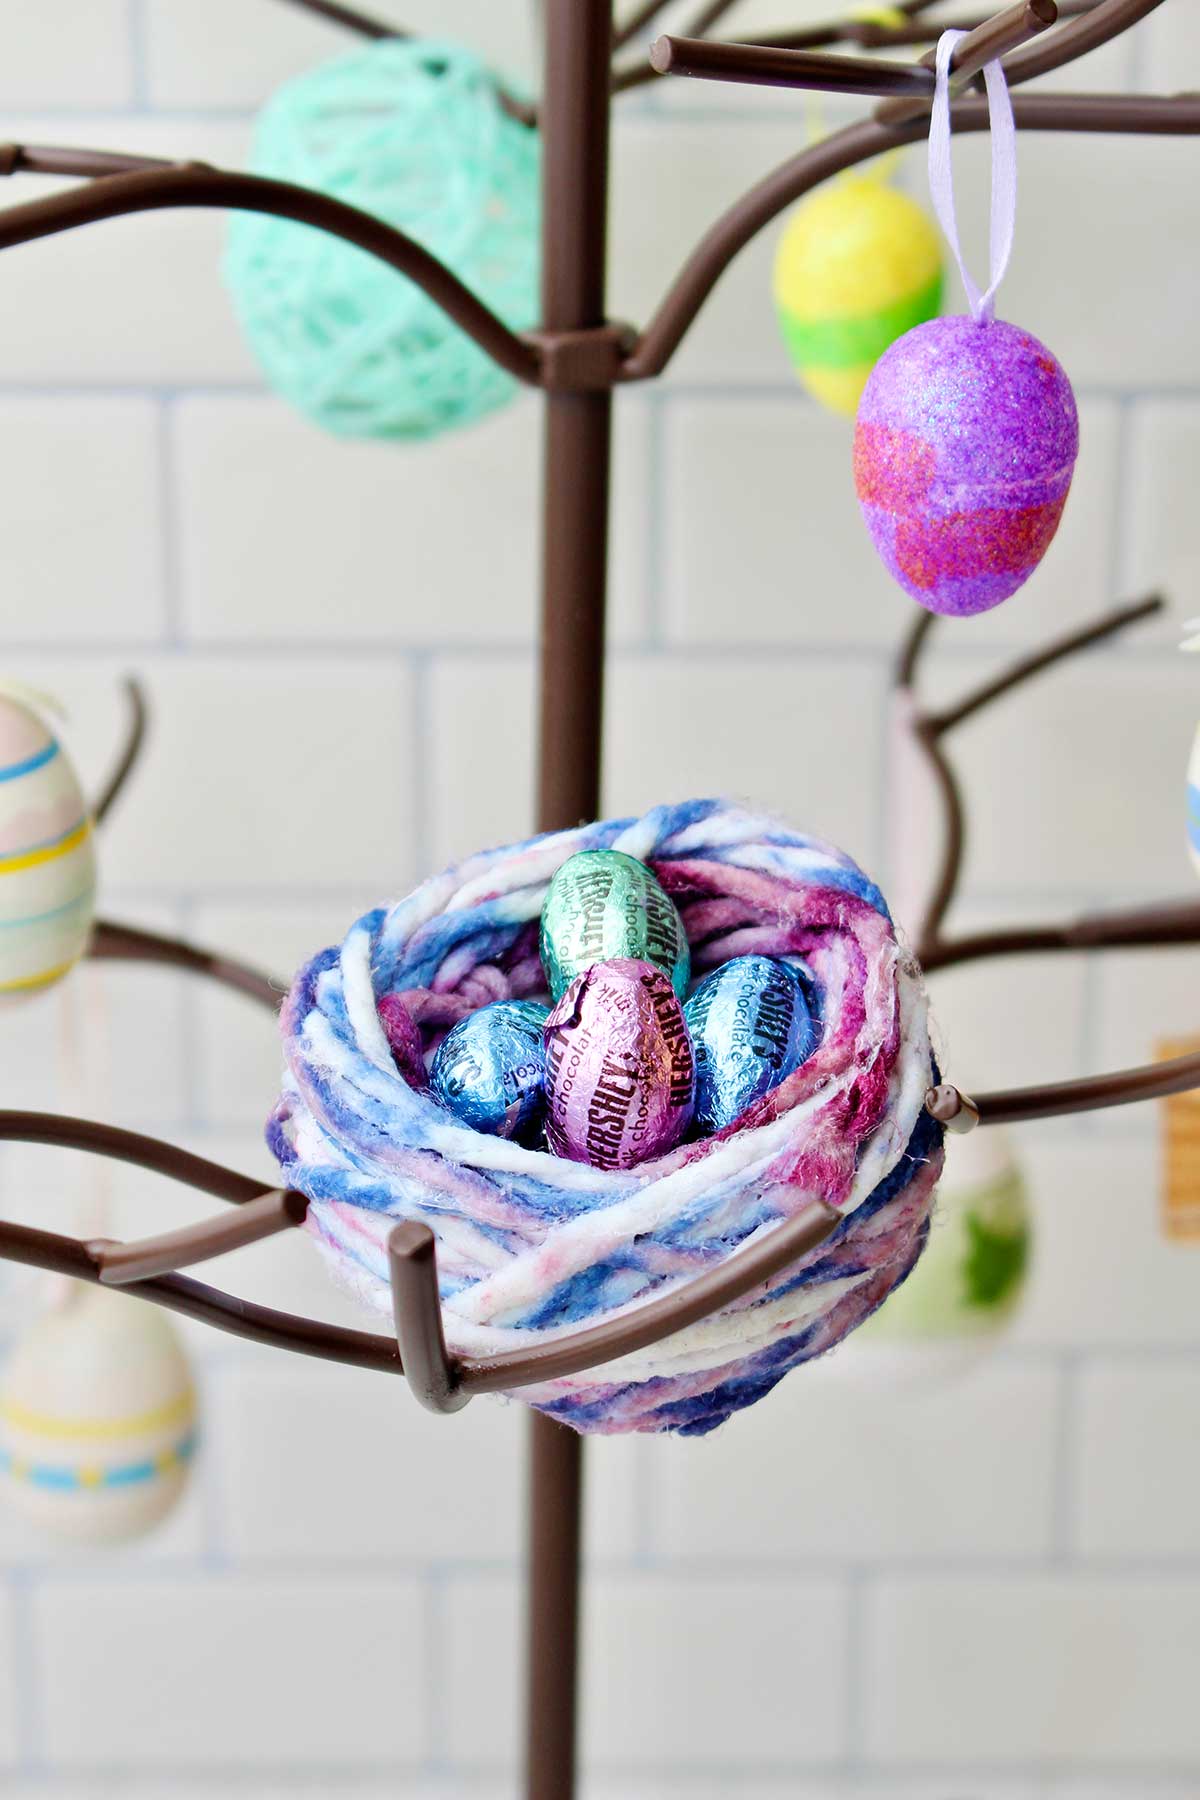 A bird nest made of colorful variegated yarn with Hershey chocolates inside.